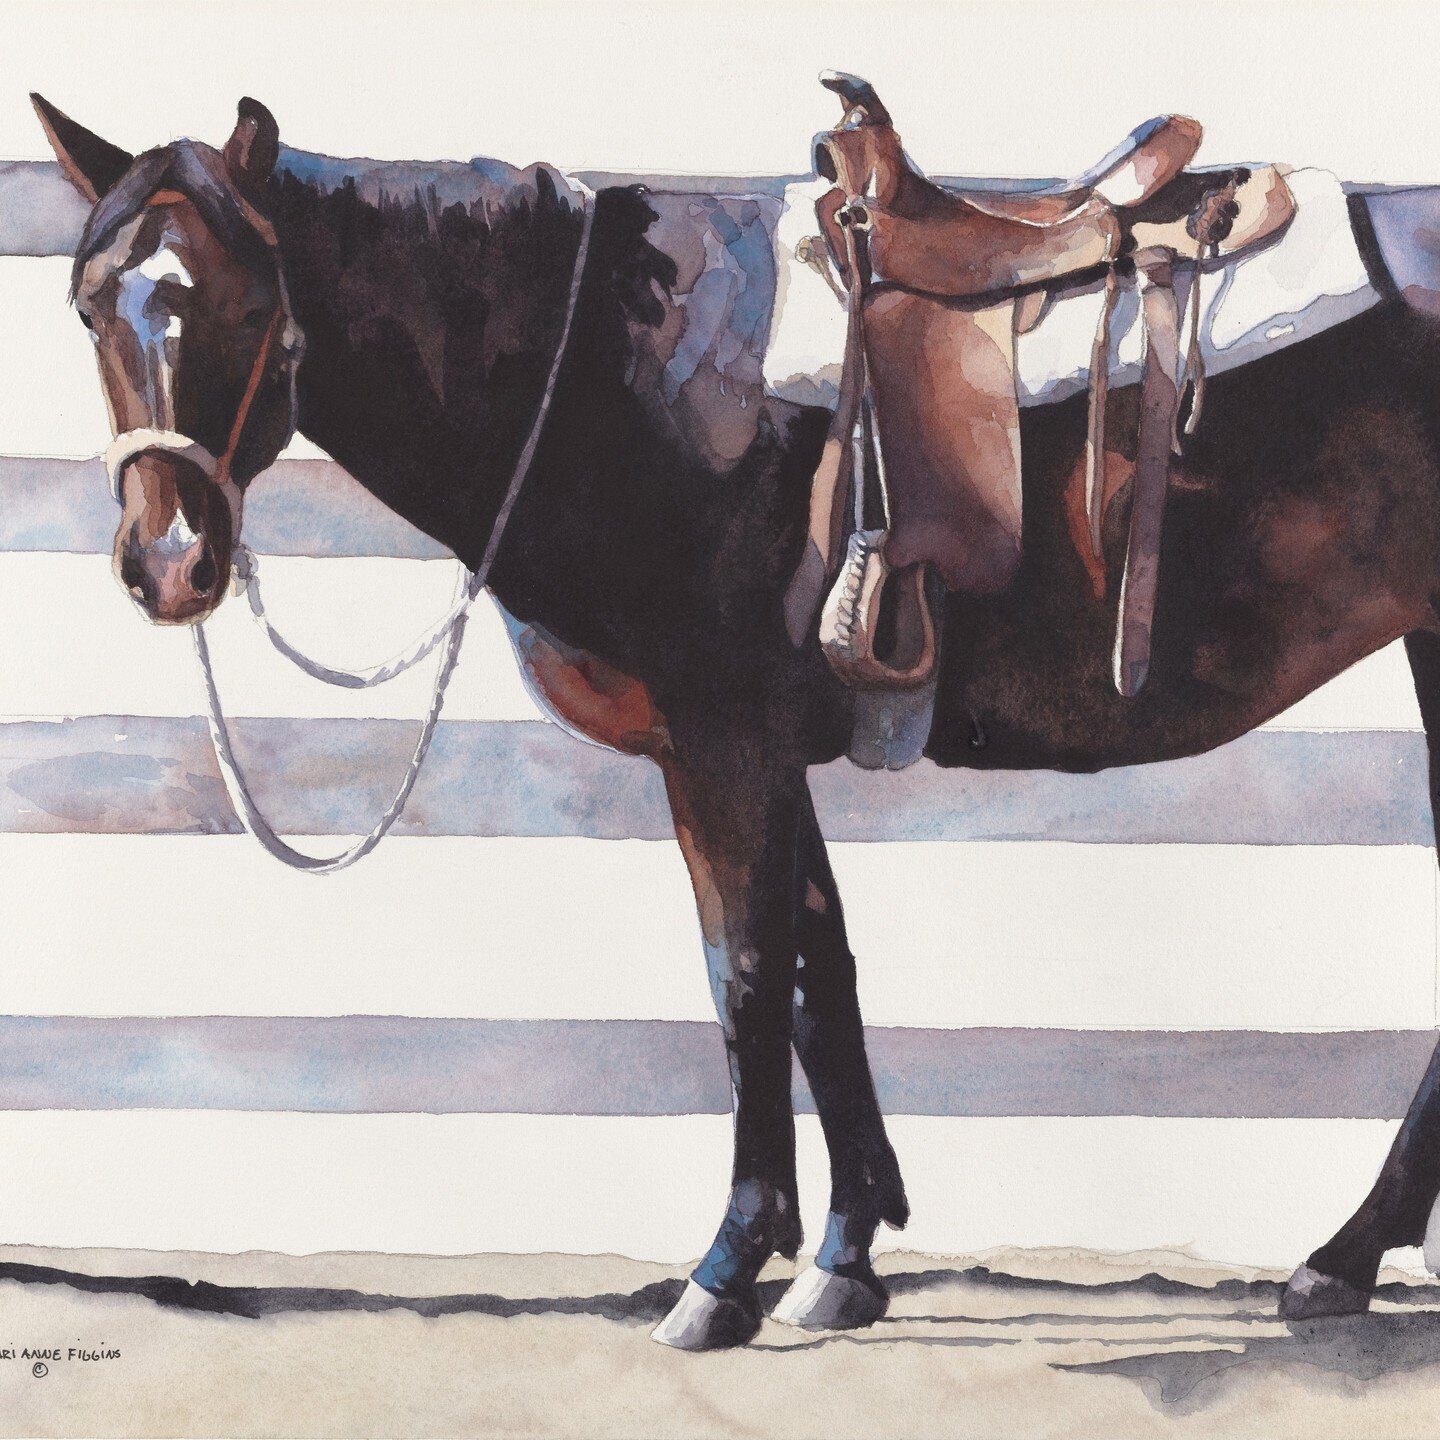 My horse &quot;Quest&quot;.... she was the best #horse. This piece hangs in my livingroom. ❤️🐴
.
.
.
.
.
#watercolor #watercolorpainting #watercolorart #watercolorartist #watercolorillustration #watercolorillustration #watercolors #watercolorpaint #